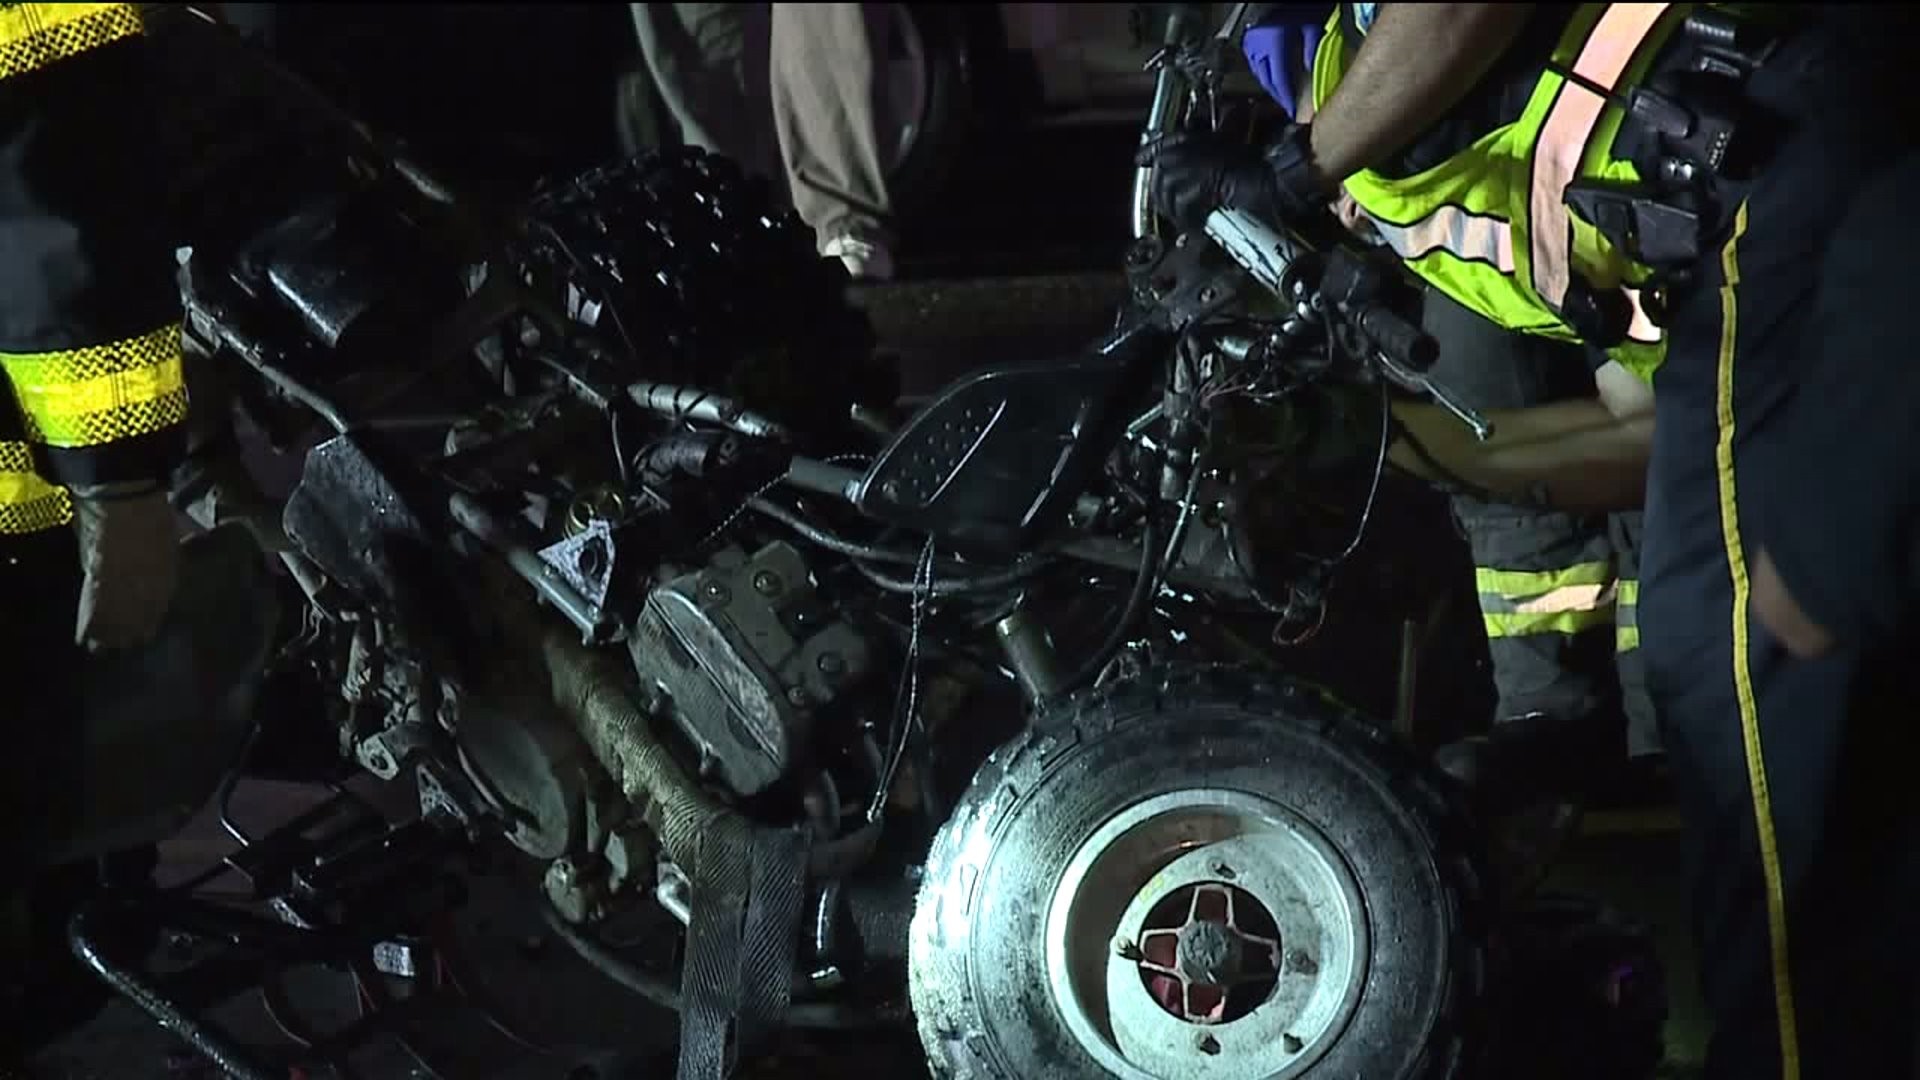 ATV Hits Jeep, One Hospitalized in Moosic